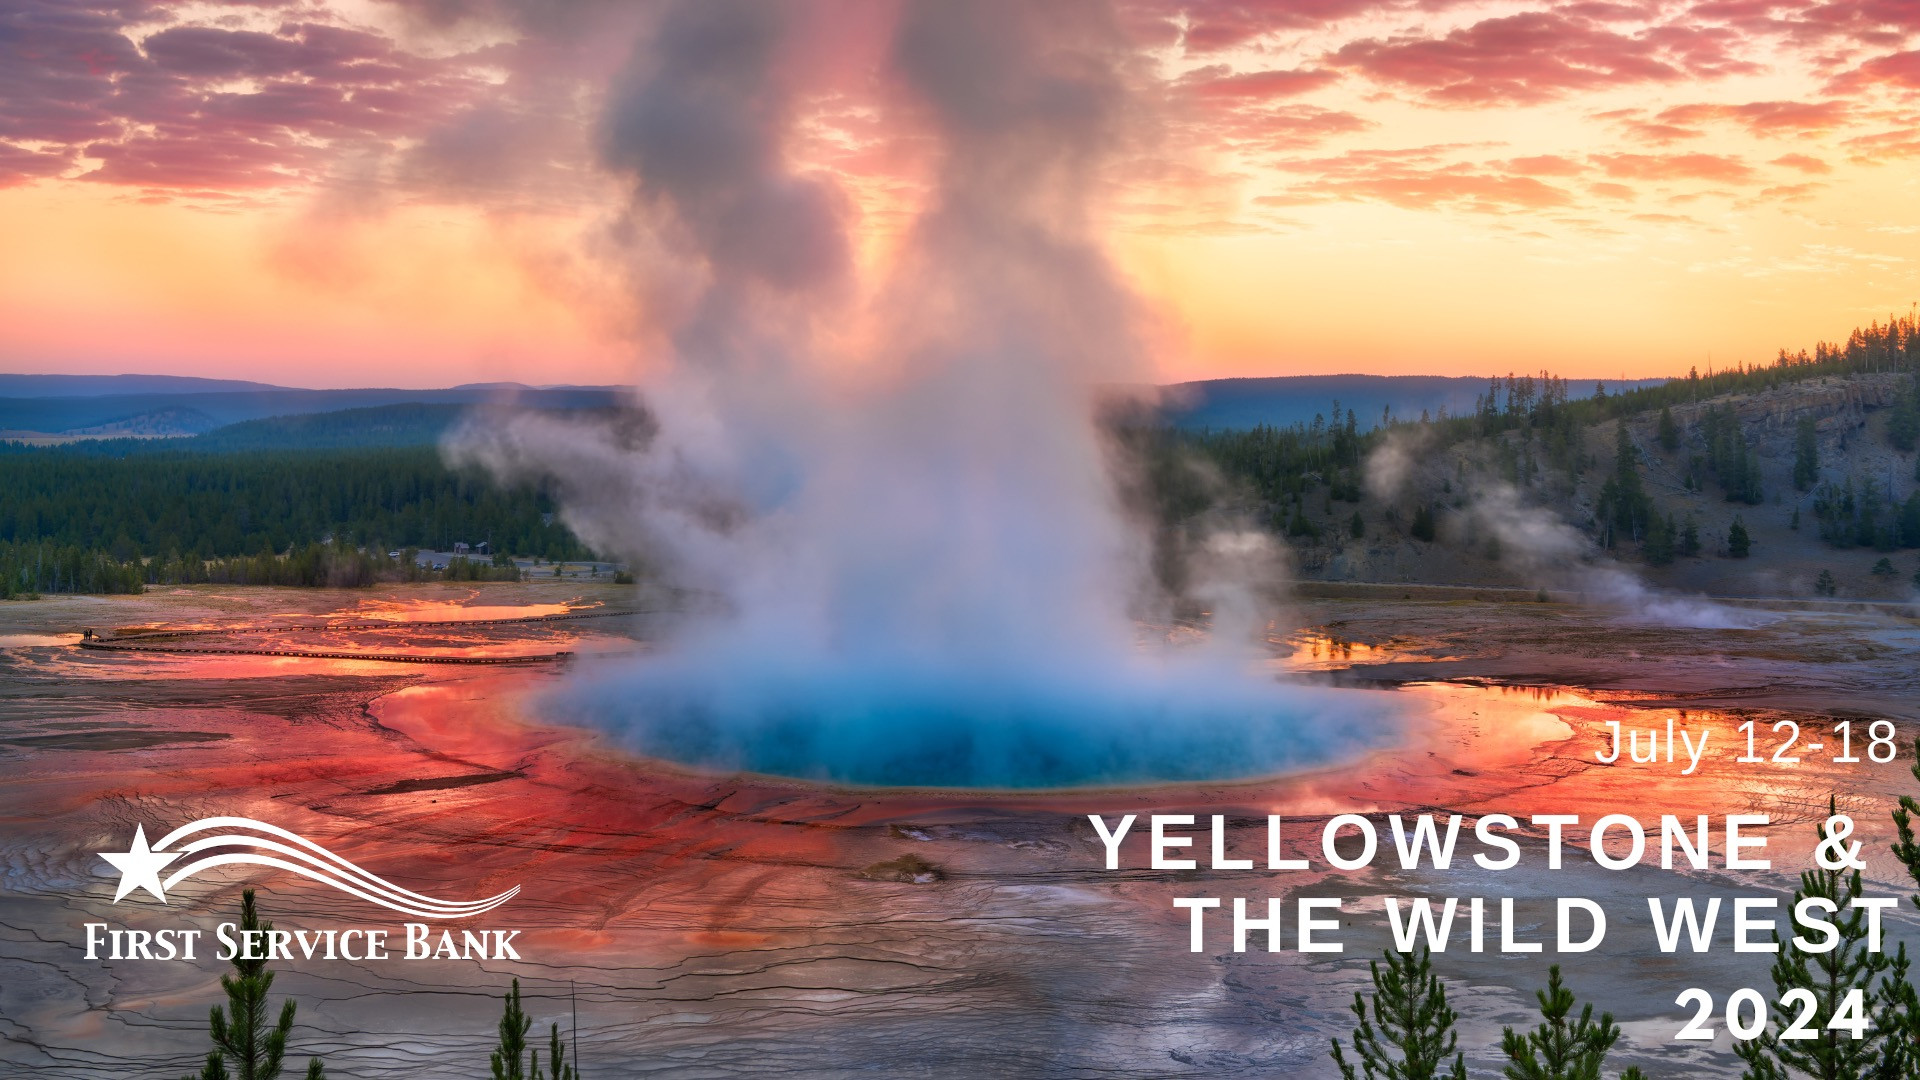 Yellowstone & The Wild West | July 12-18, 2024